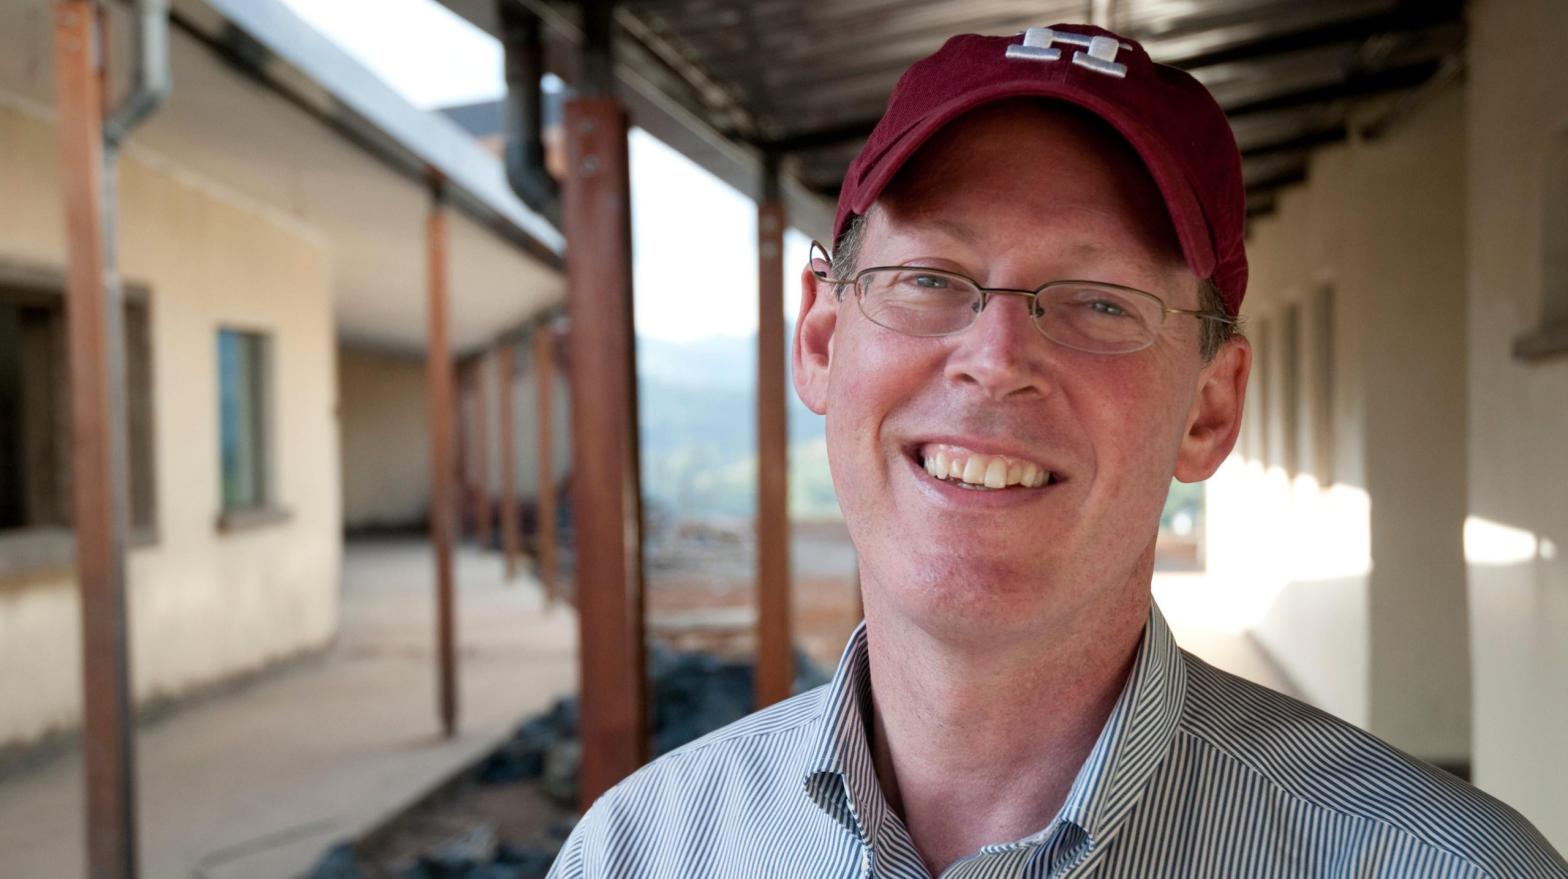 File photo of Paul Farmer in 2010 at the Butaro Hospital built by Partners In Health for the Rwanda Ministry of Health. (Photo: William Campbell/Corbis, Getty Images)